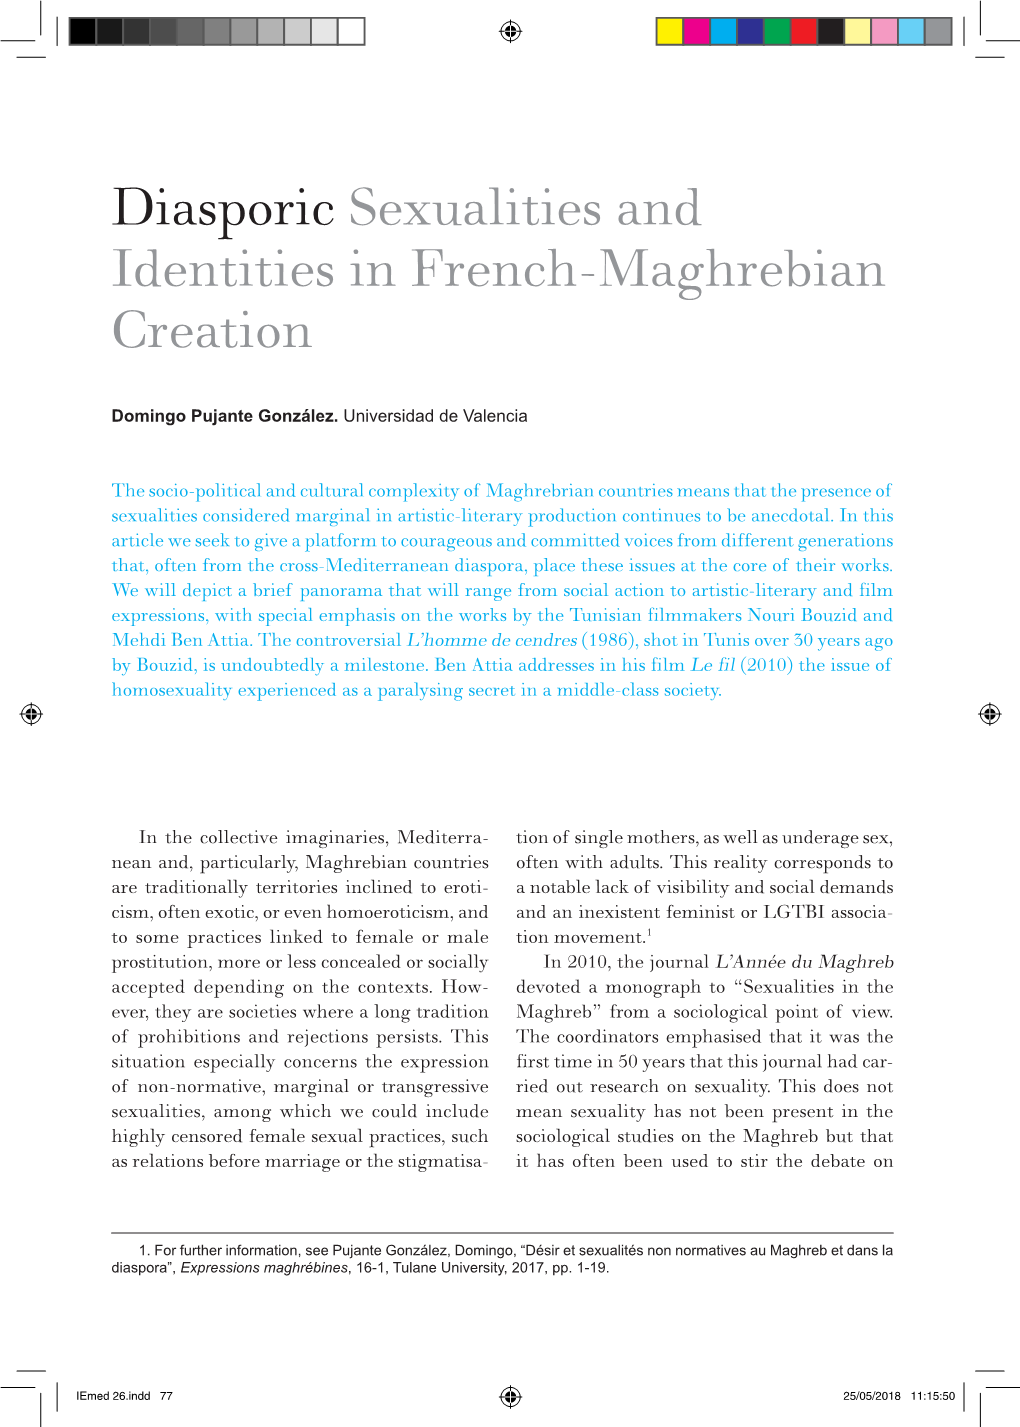 Diasporic Sexualities and Identities in French-Maghrebian Creation